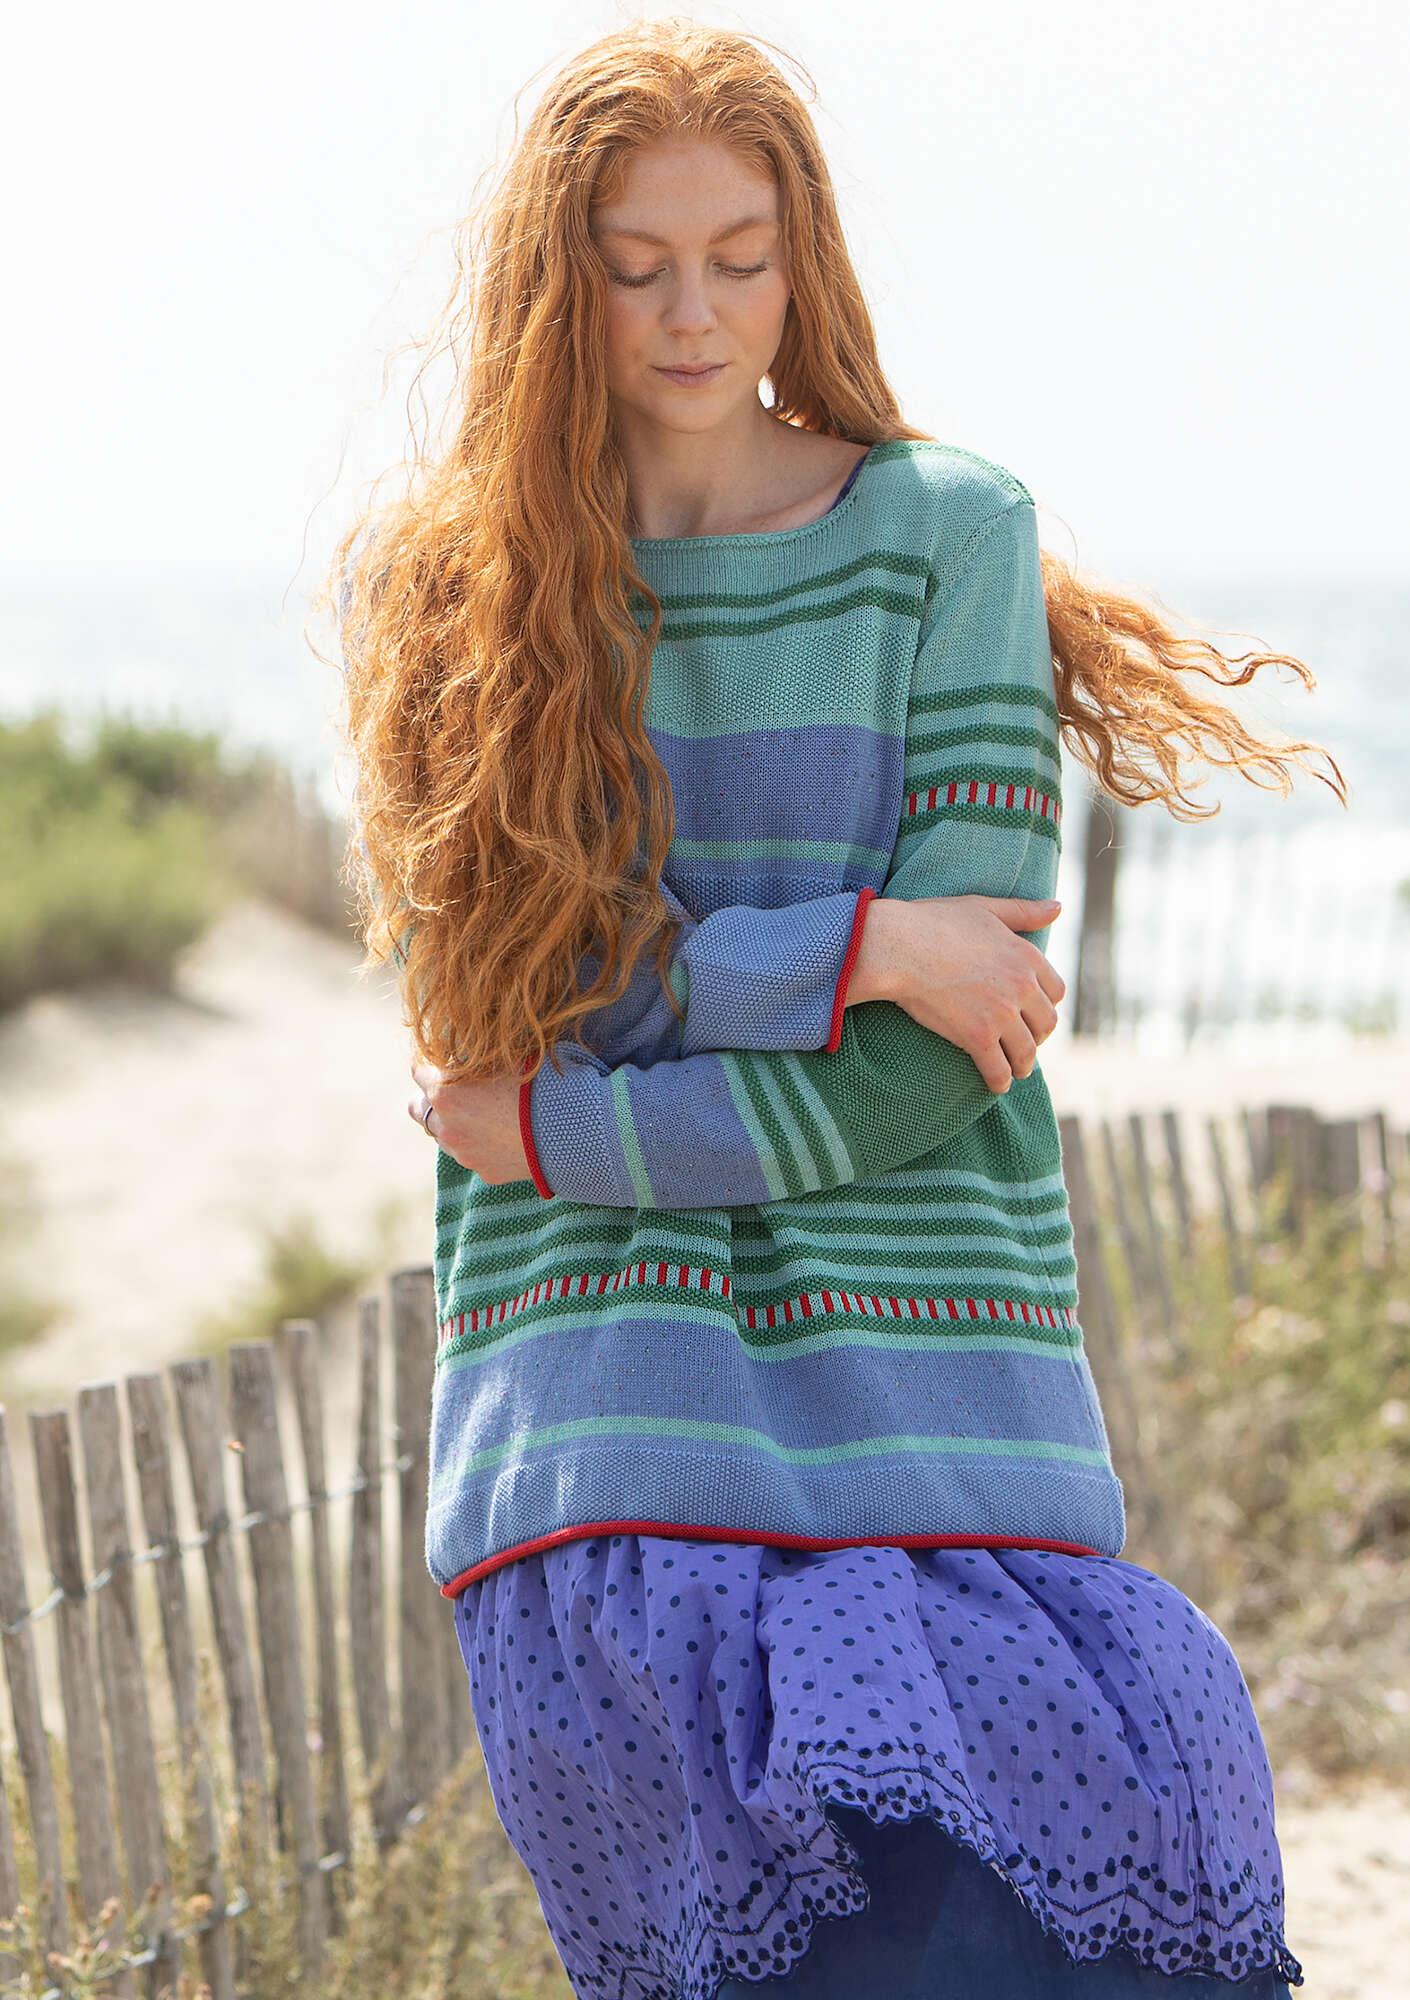 “Alfrida” sweater in recycled and organic cotton meadow brook/striped